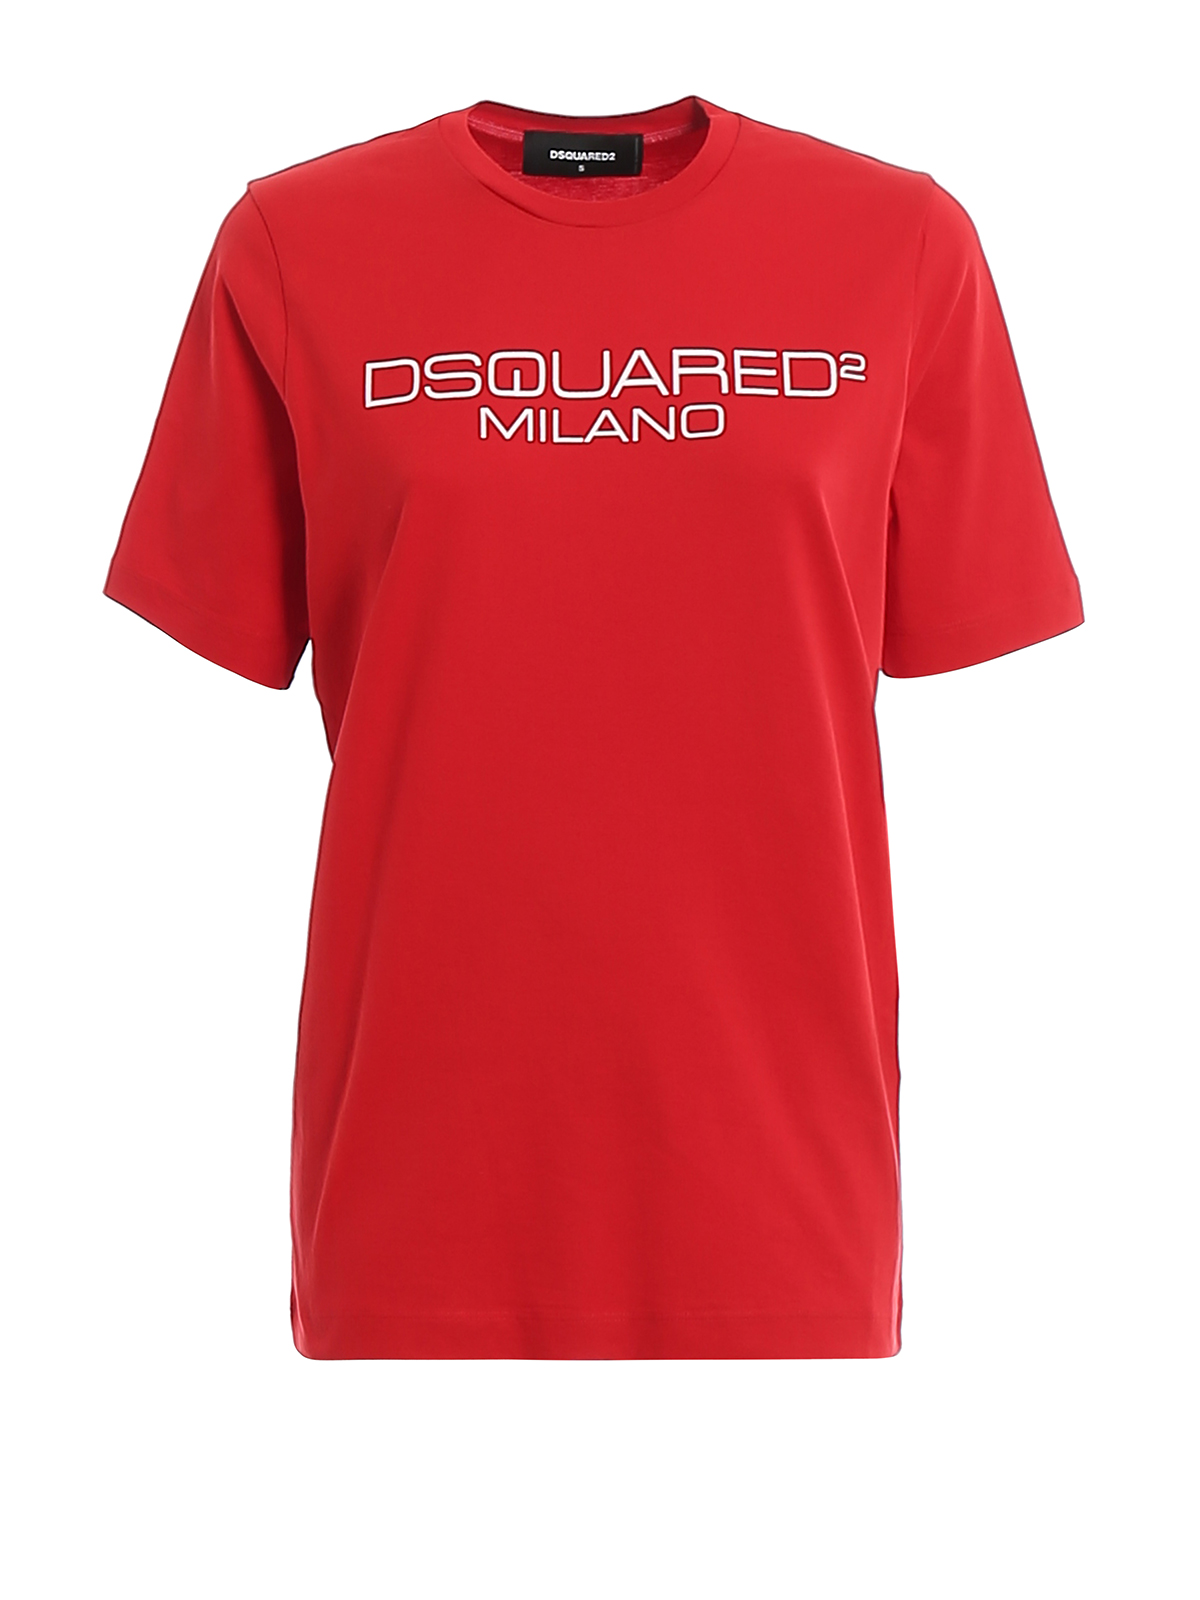 DSQUARED2 MILANO RED COTTON TEE